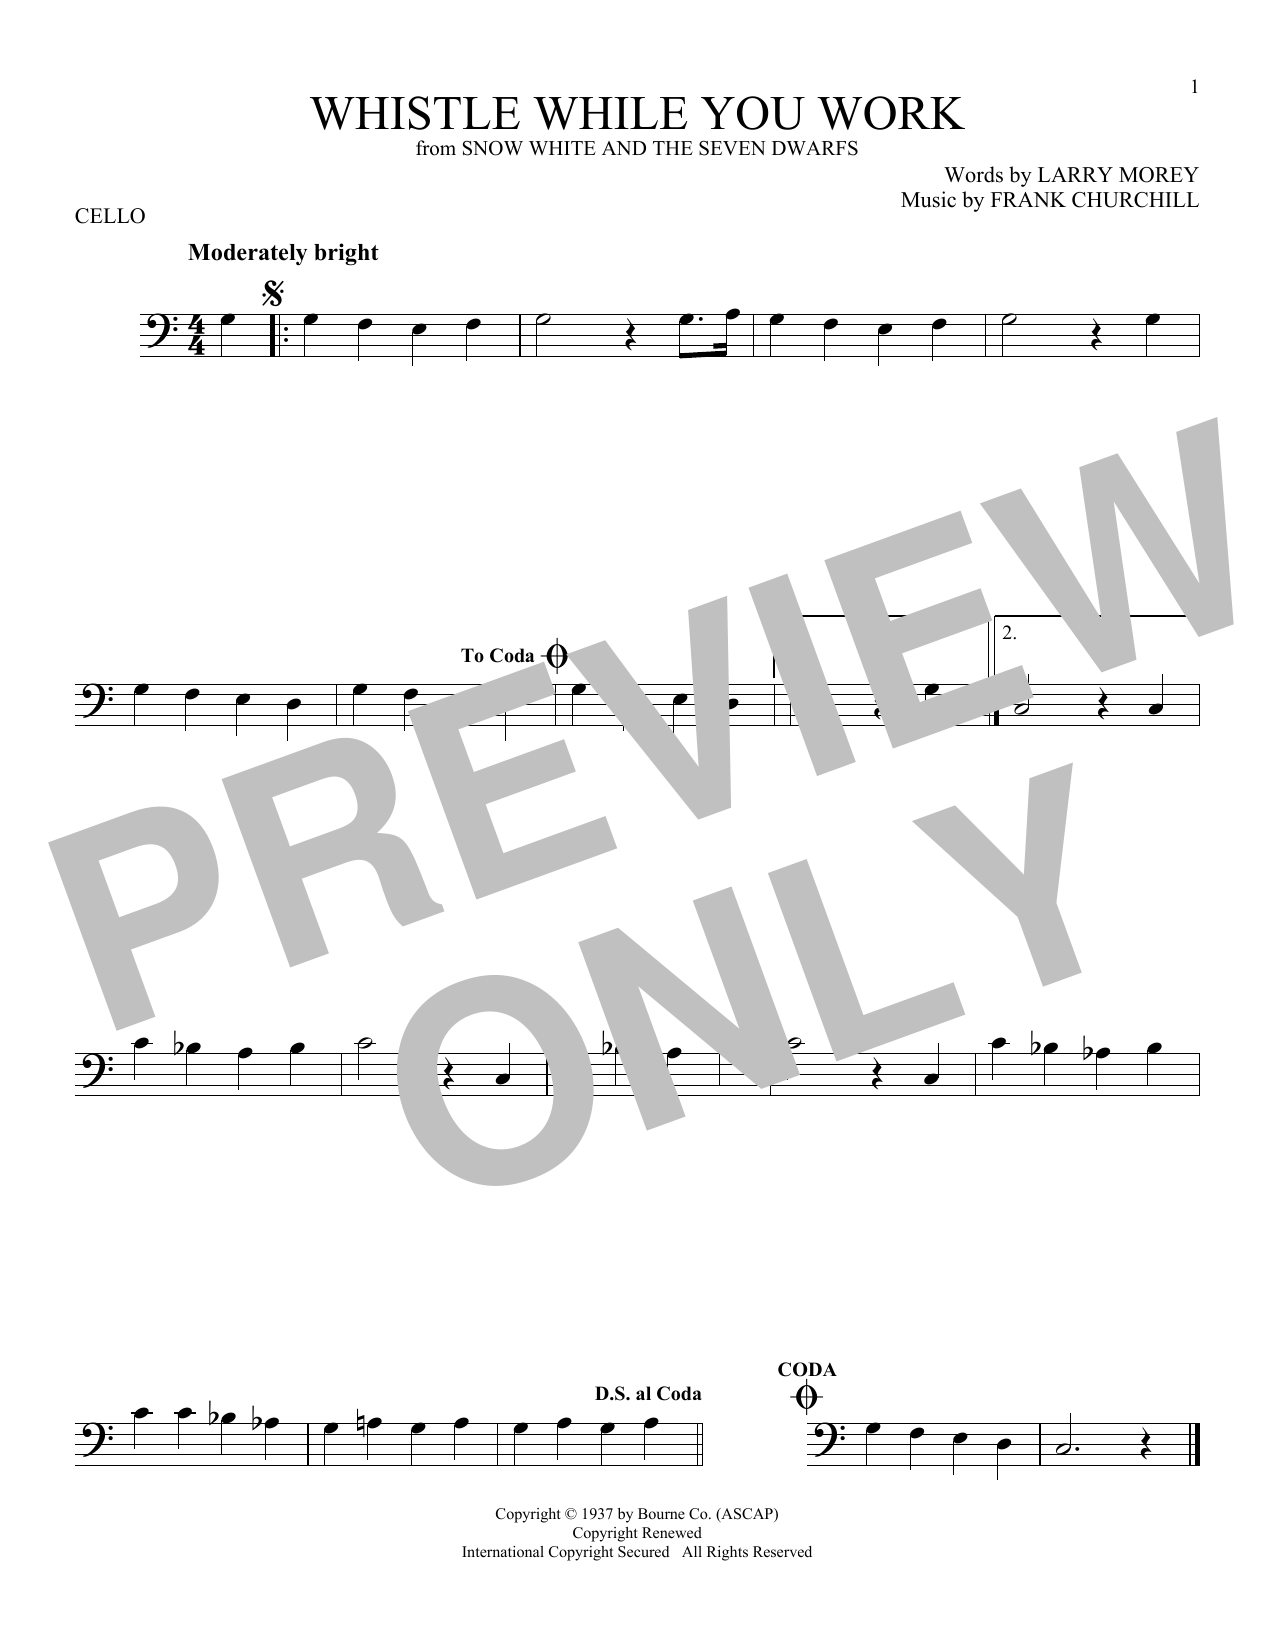 Download Frank Churchill Whistle While You Work Sheet Music